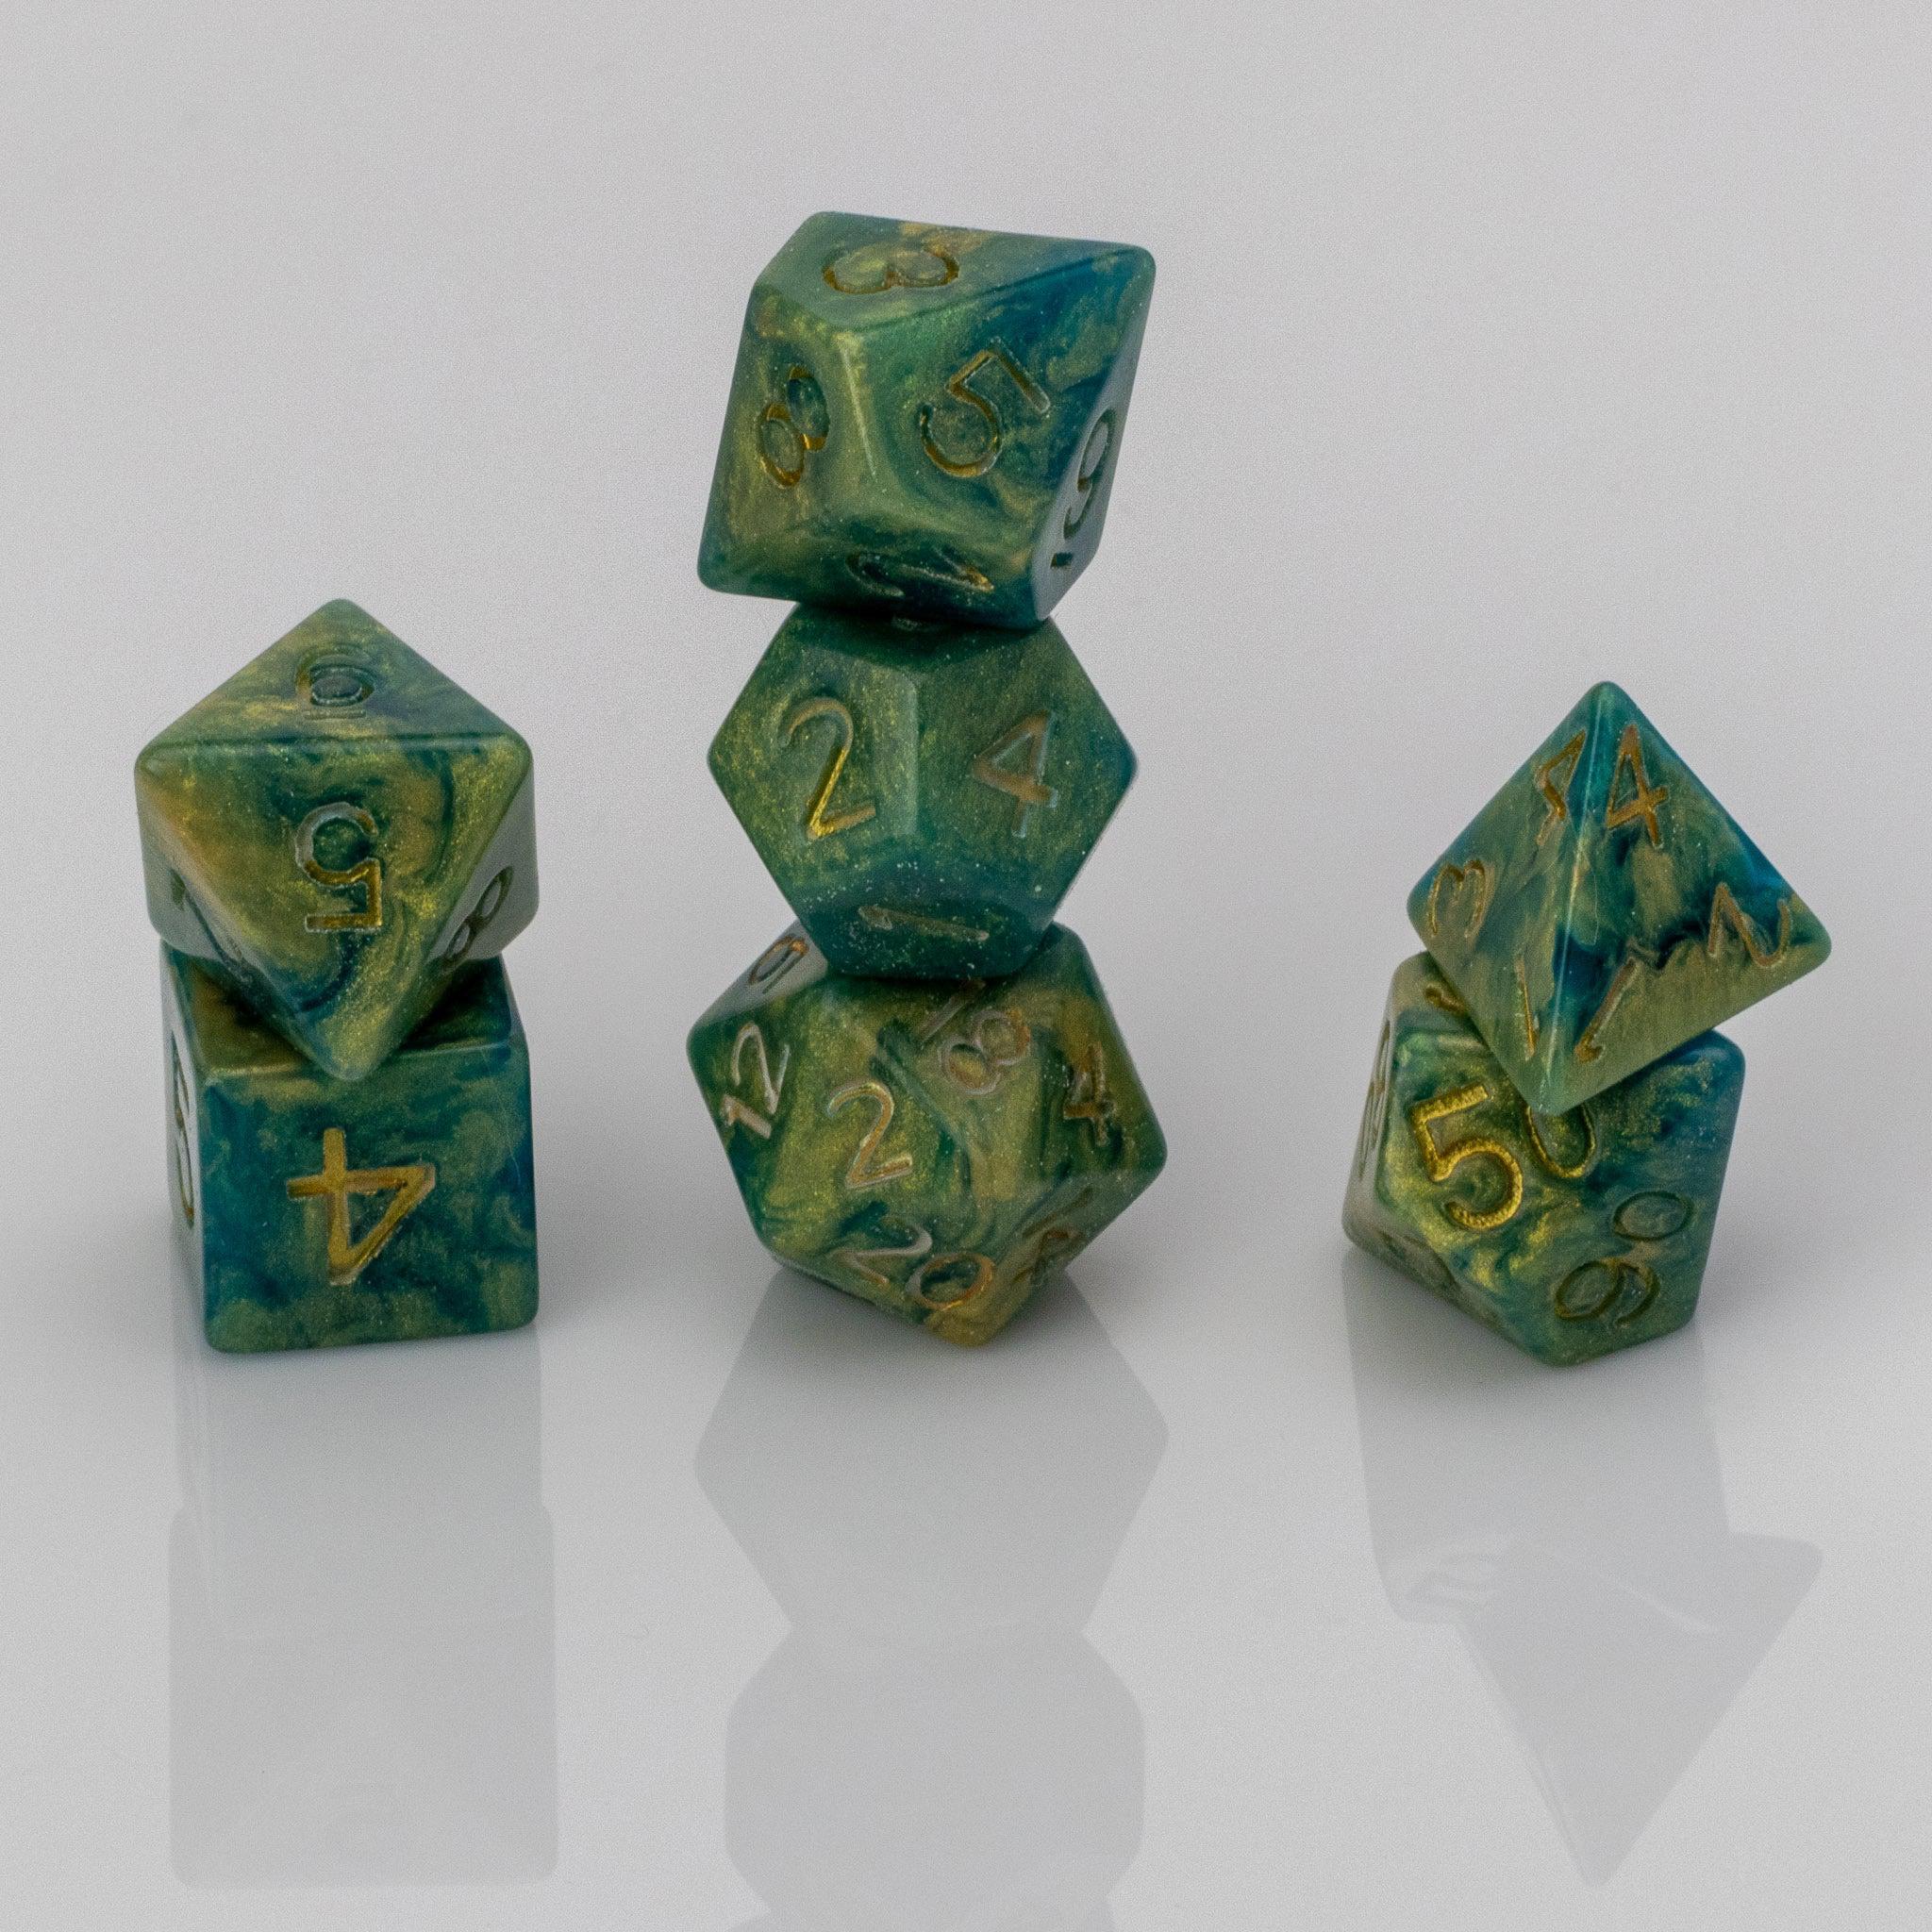 Genesis, green and gold 7 piece resin RPG dice set stacked on white background.